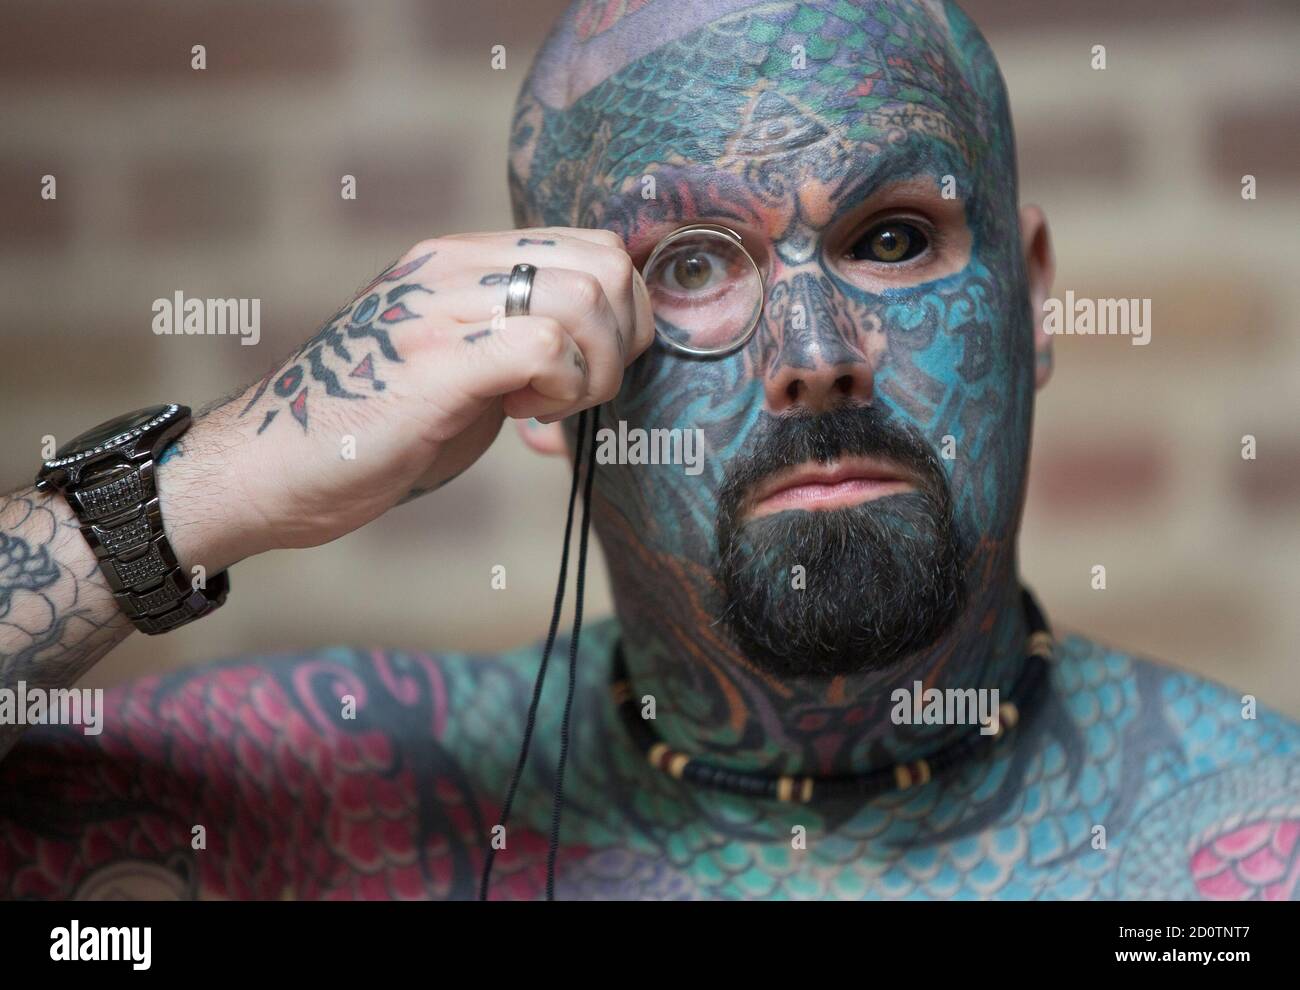 A man who has changed his name to King of Ink Land King Body Art The  Extreme Ink-ite adjusts his monocle as he poses during the 10th  International Tattoo Convention in London